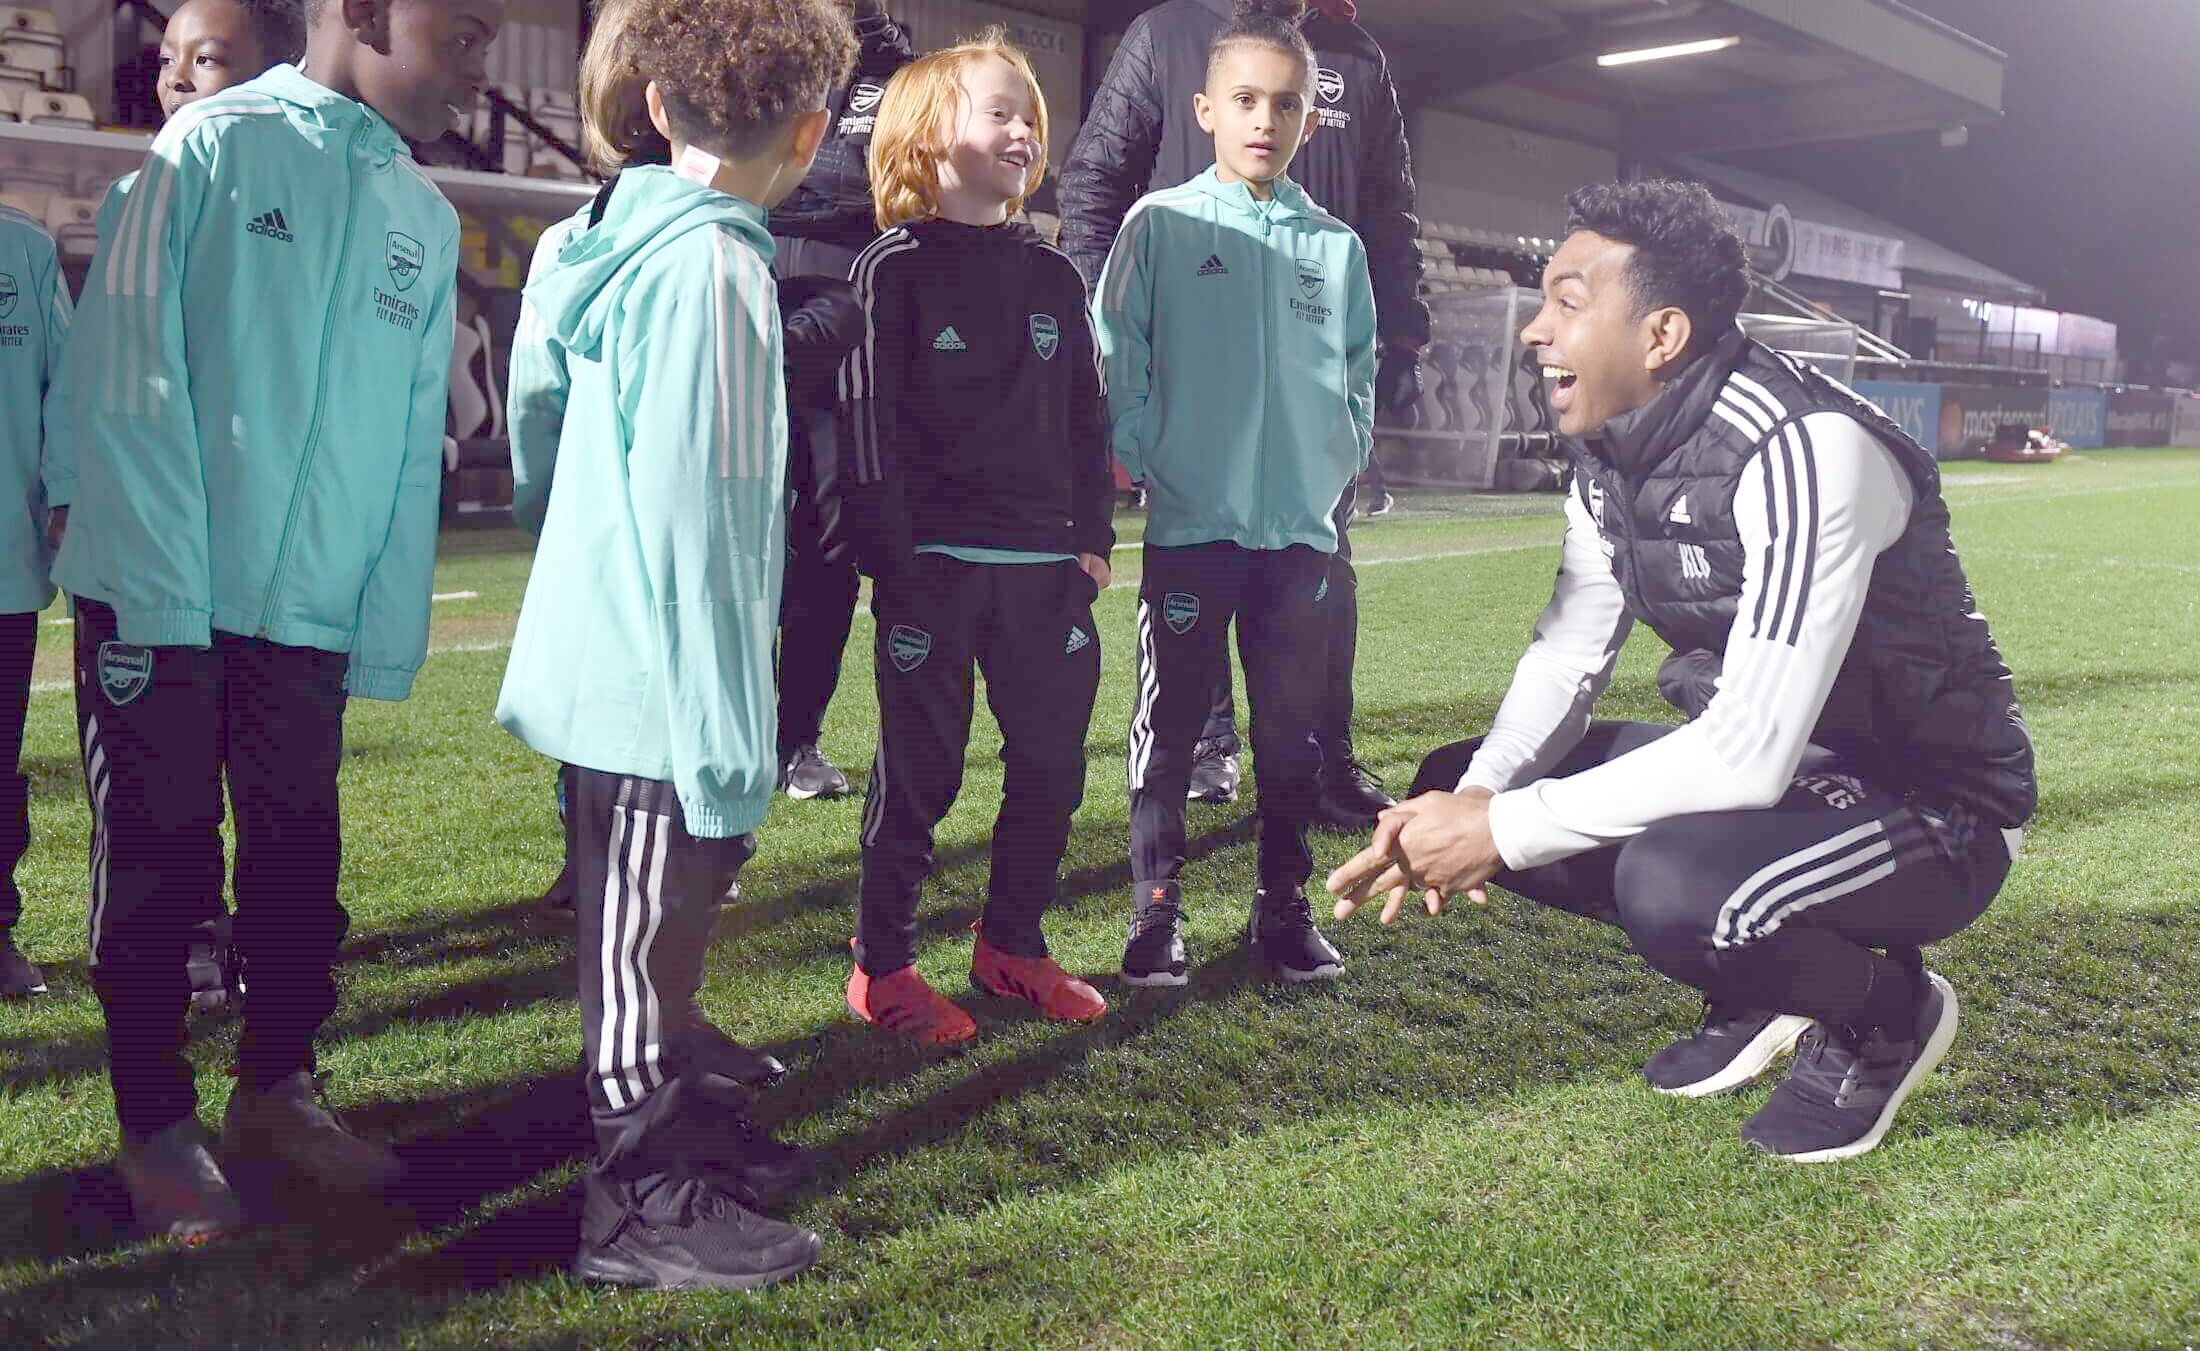 A coach squats down to talk to a group of young footballers inside a football stadium